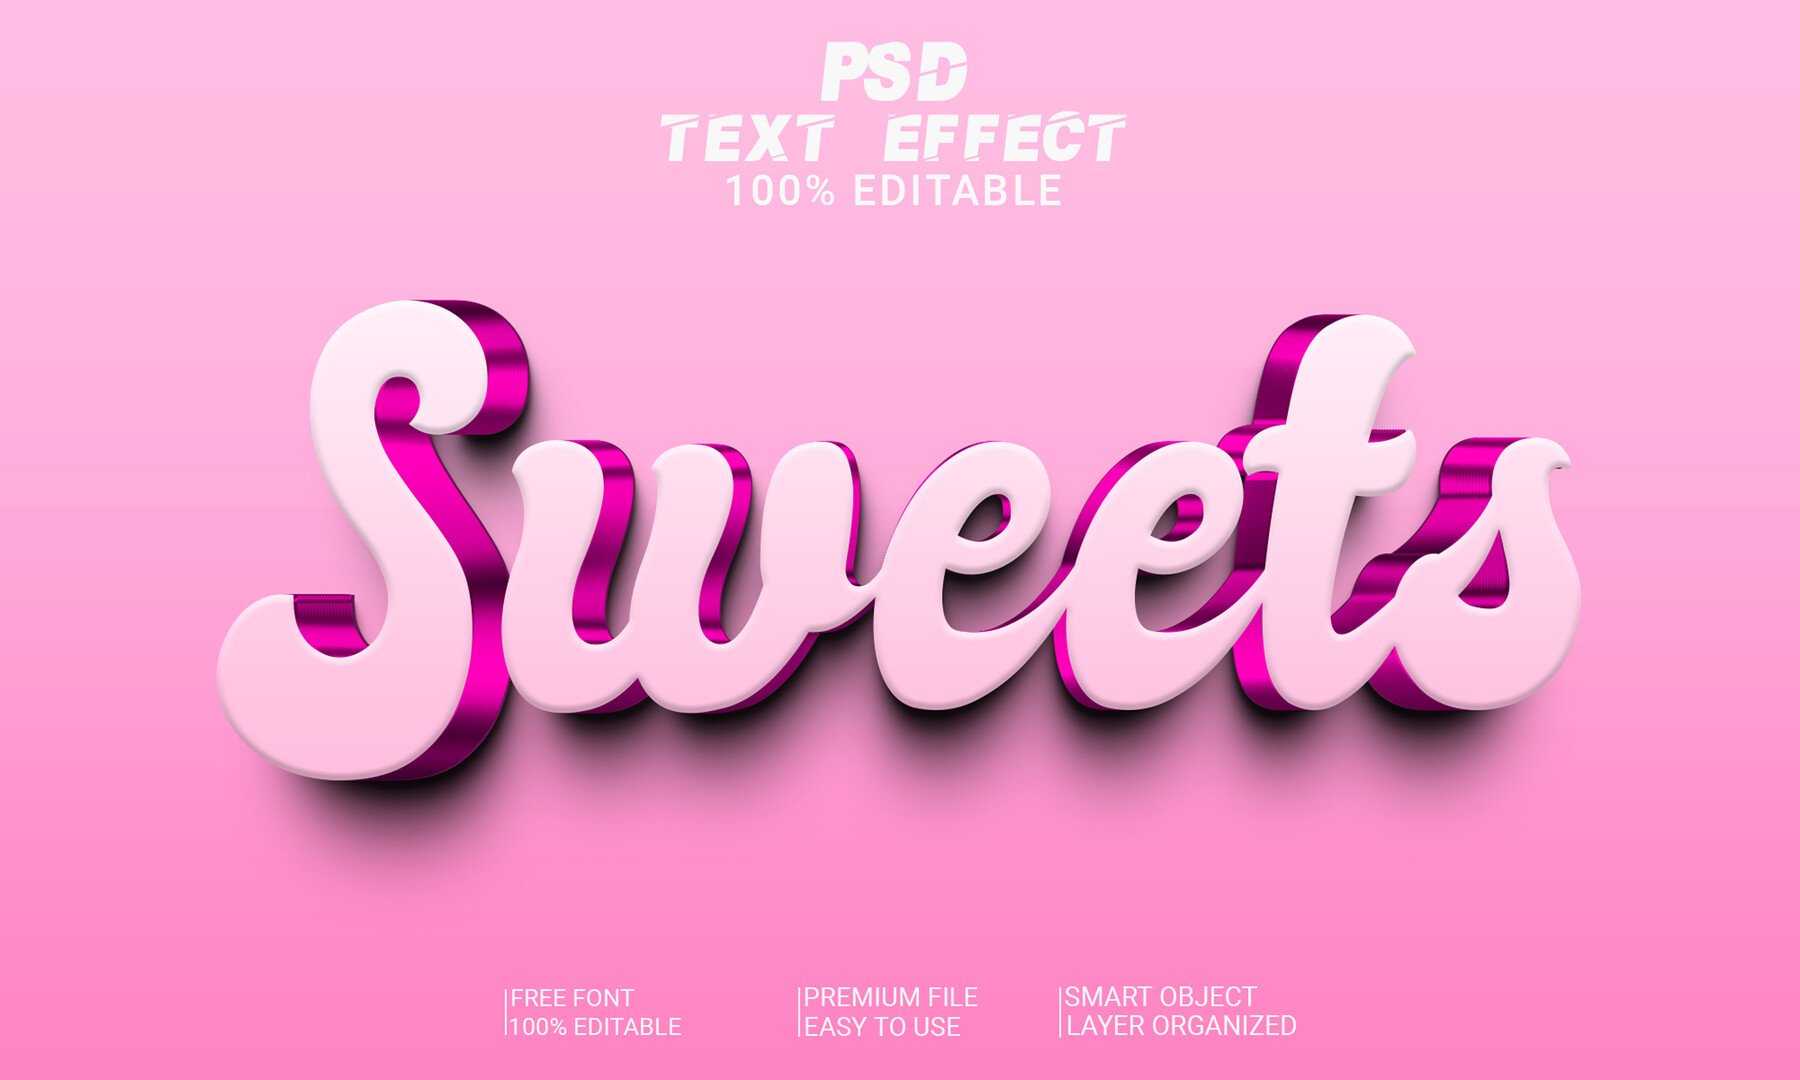 ArtStation - 3D Sweets PSD fully editable text effect. Layer style PSD ...